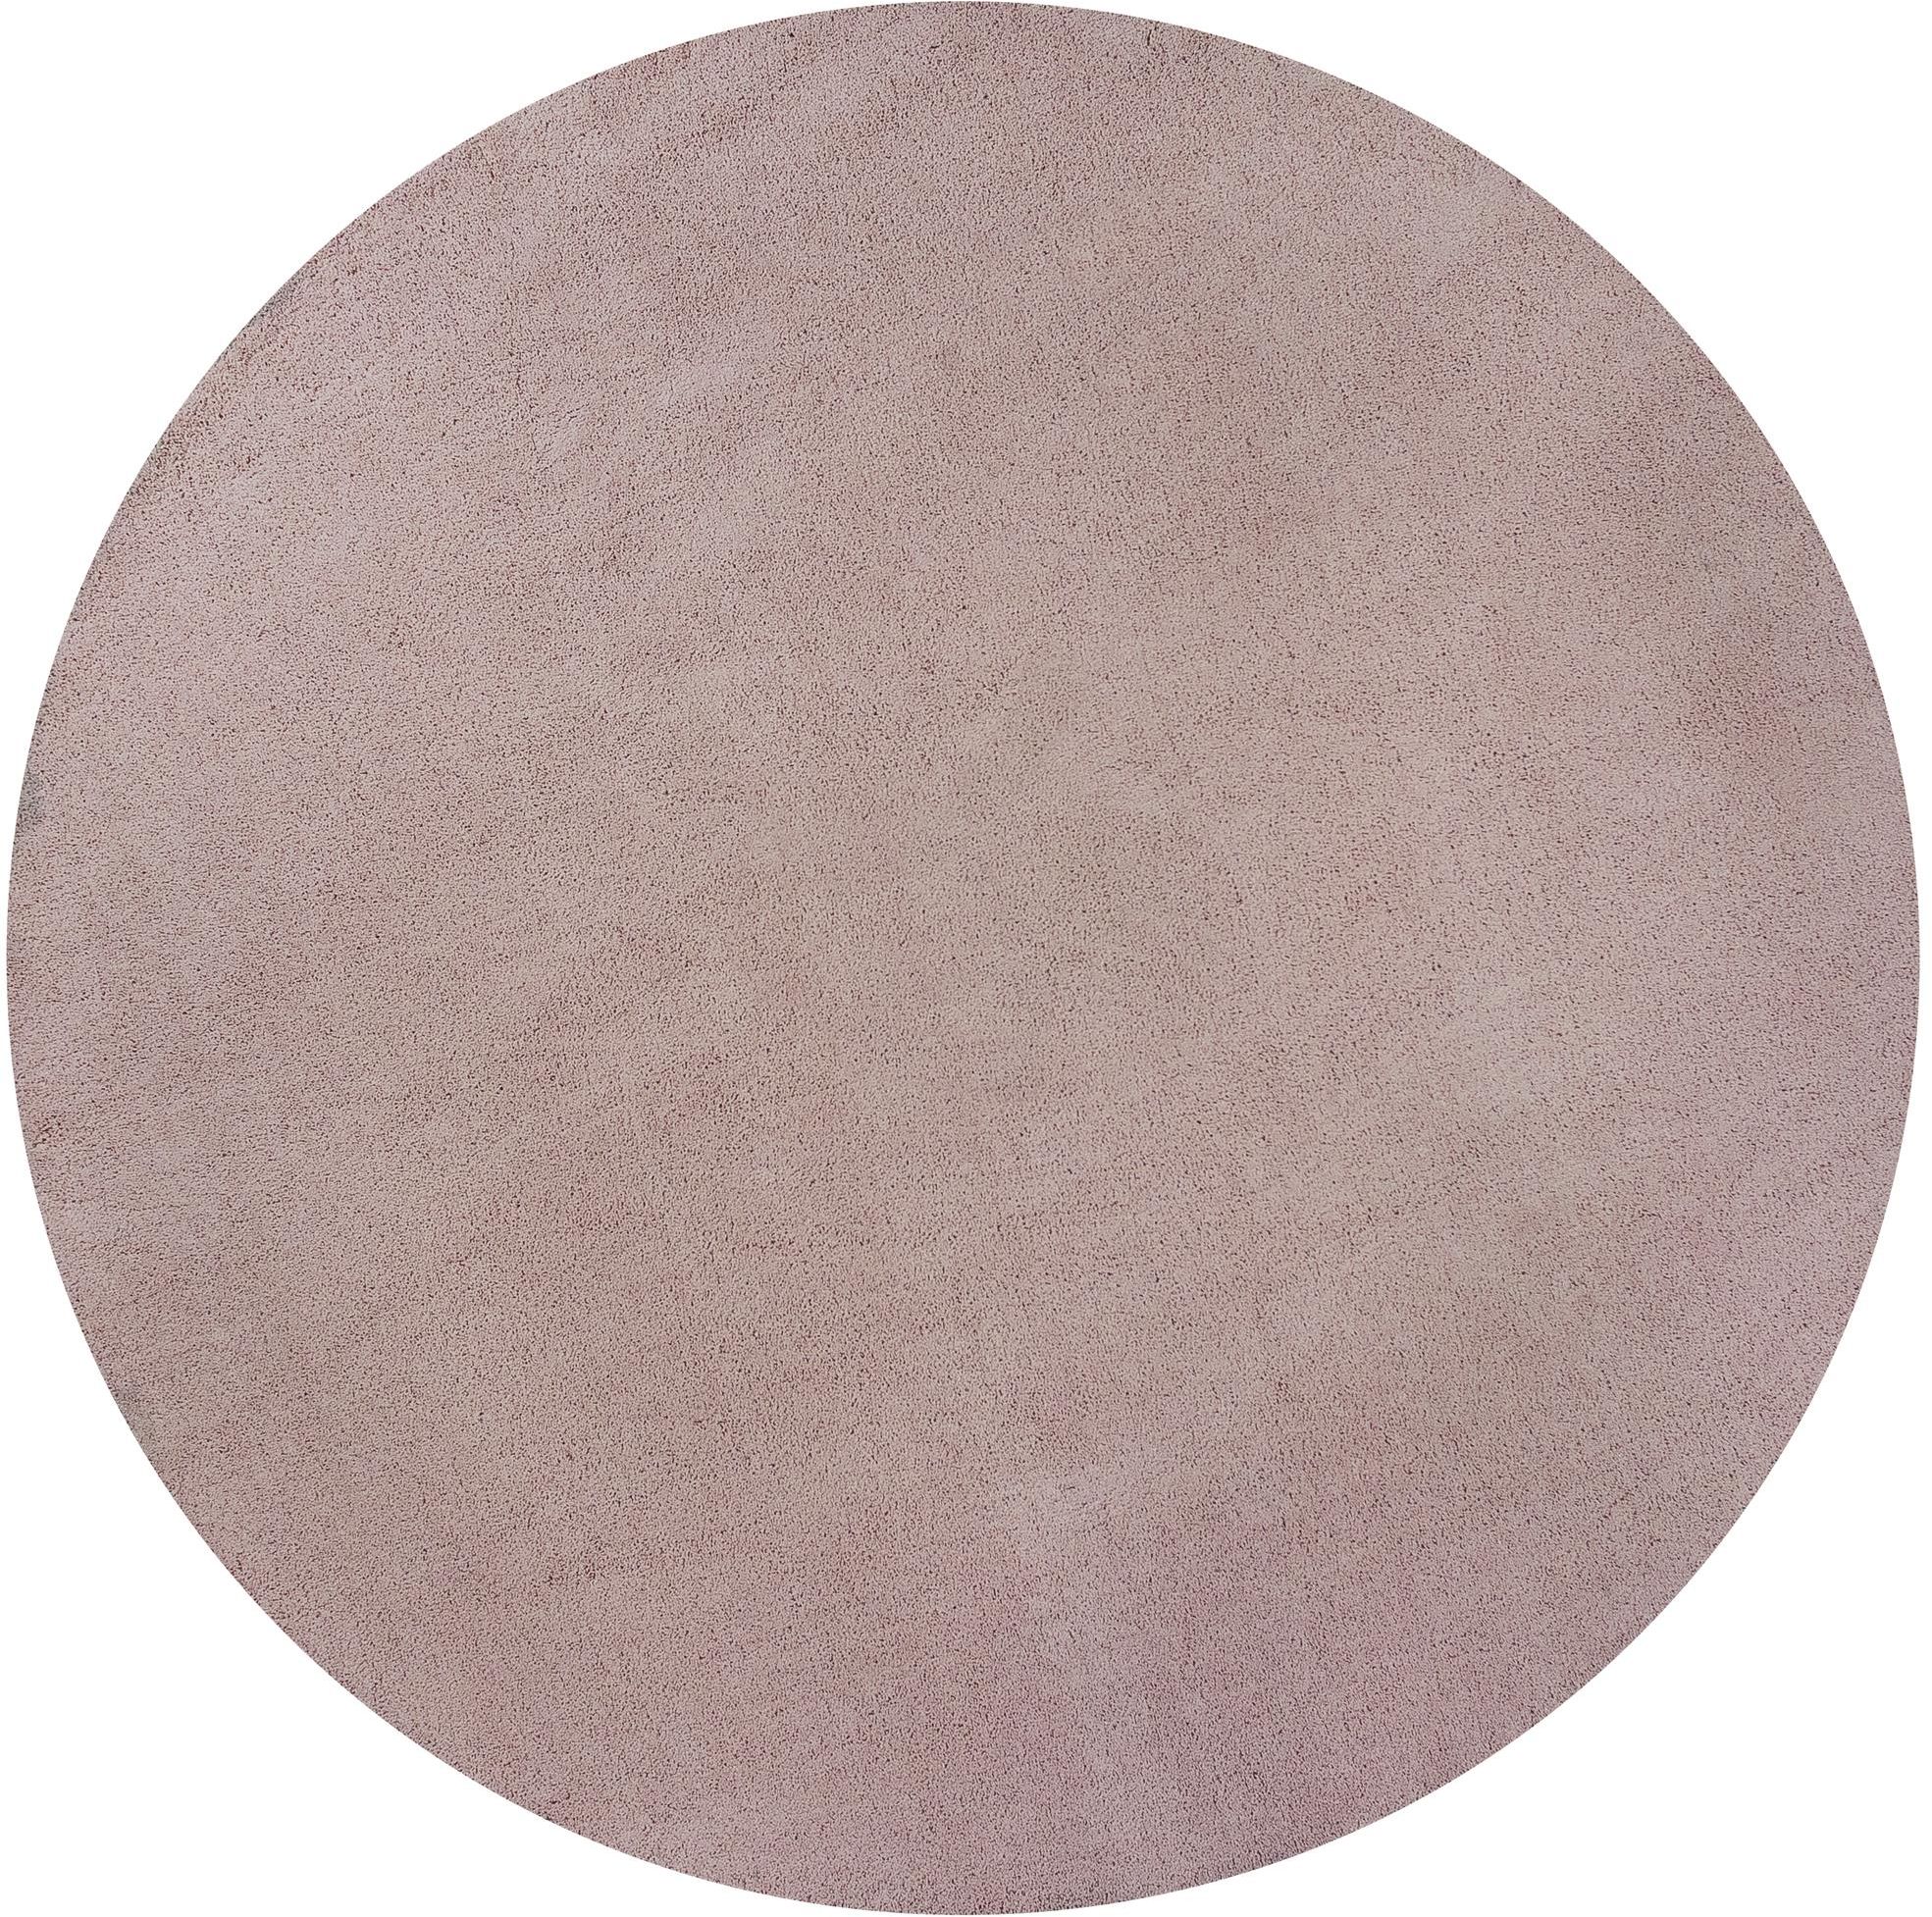 KAS Rugs Bliss 8" Round Rug